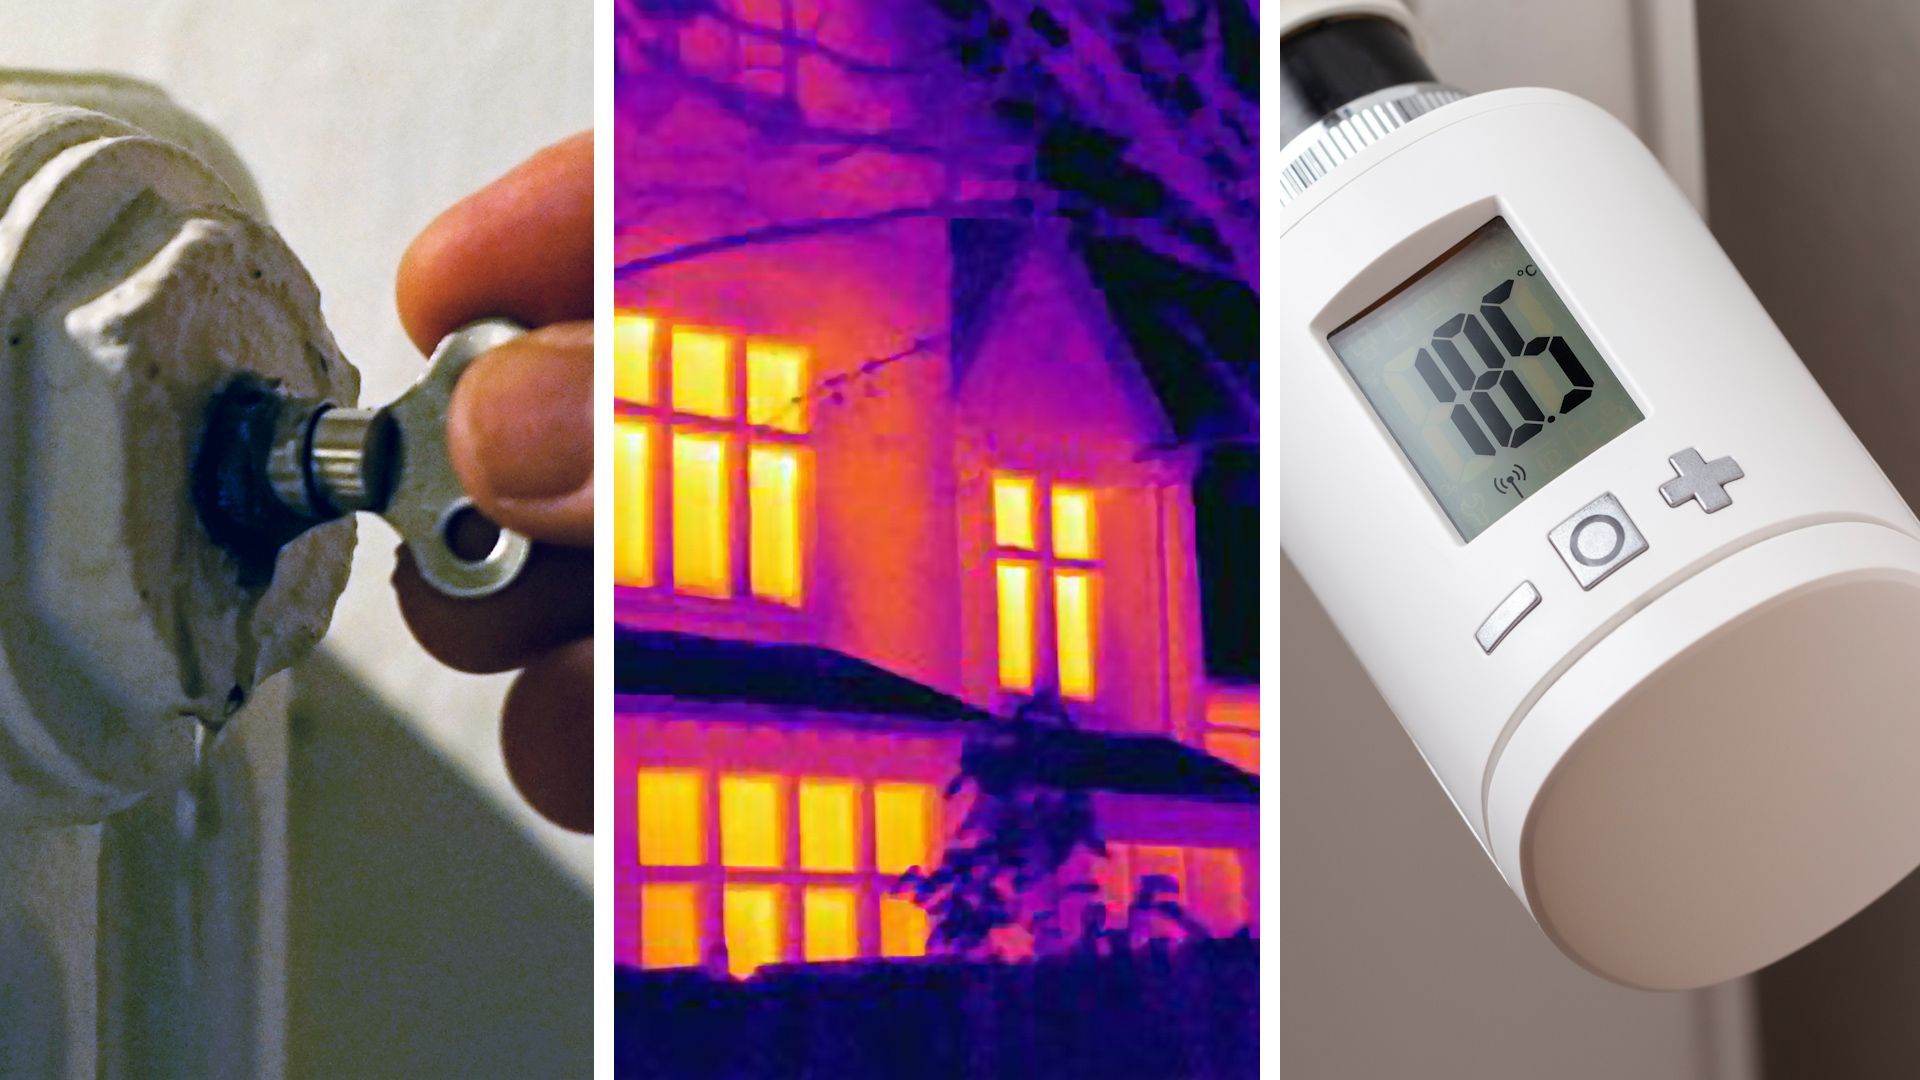 Heating properly: 7 tips that really save money and energy